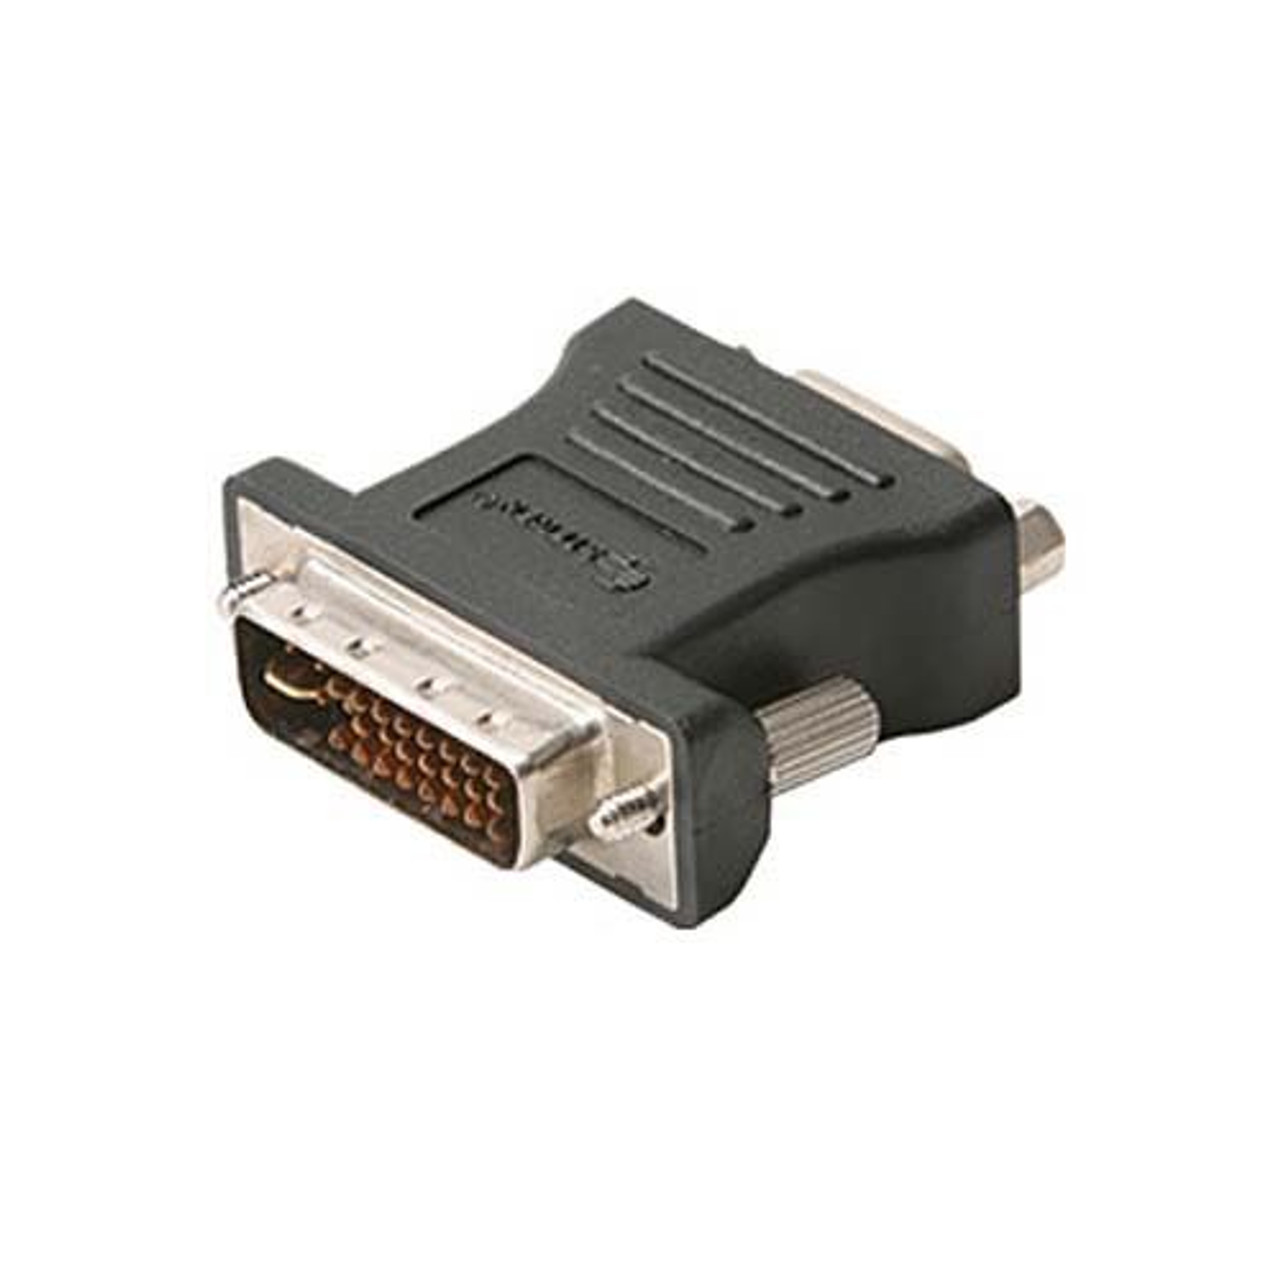 Eagle DVI-A Male to HD15 VGA Female Adapter Gold Pro Grade Video M/F Cable Plug Adapter Gold Plated Contacts Pure Copper Premium Analog Resolution